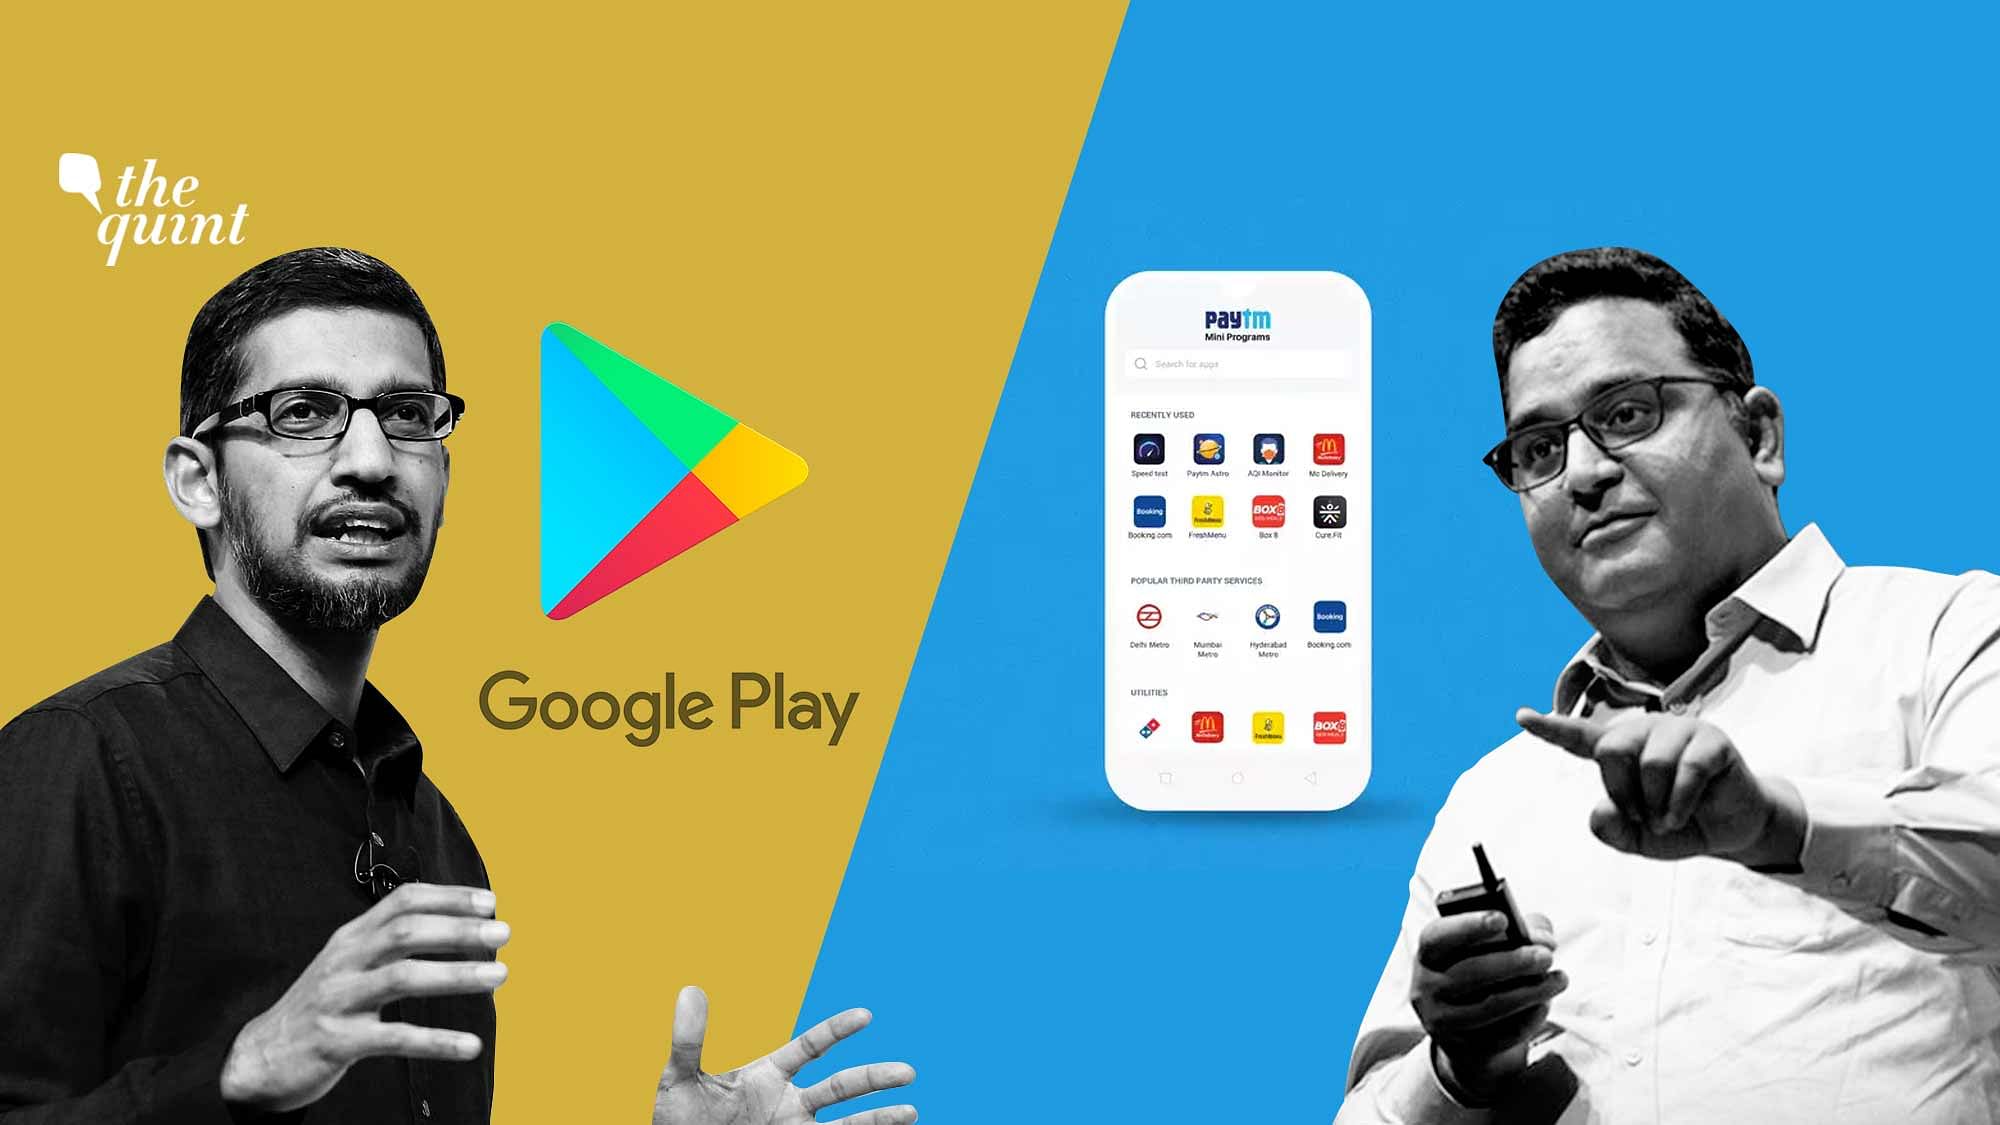 As the Google vs PayTm  battle looks set to intensify over the coming weeks, The Quint unpacks the app store clash and why Indian startups are taking on Google and what a <i>desi</i> app store may look like.